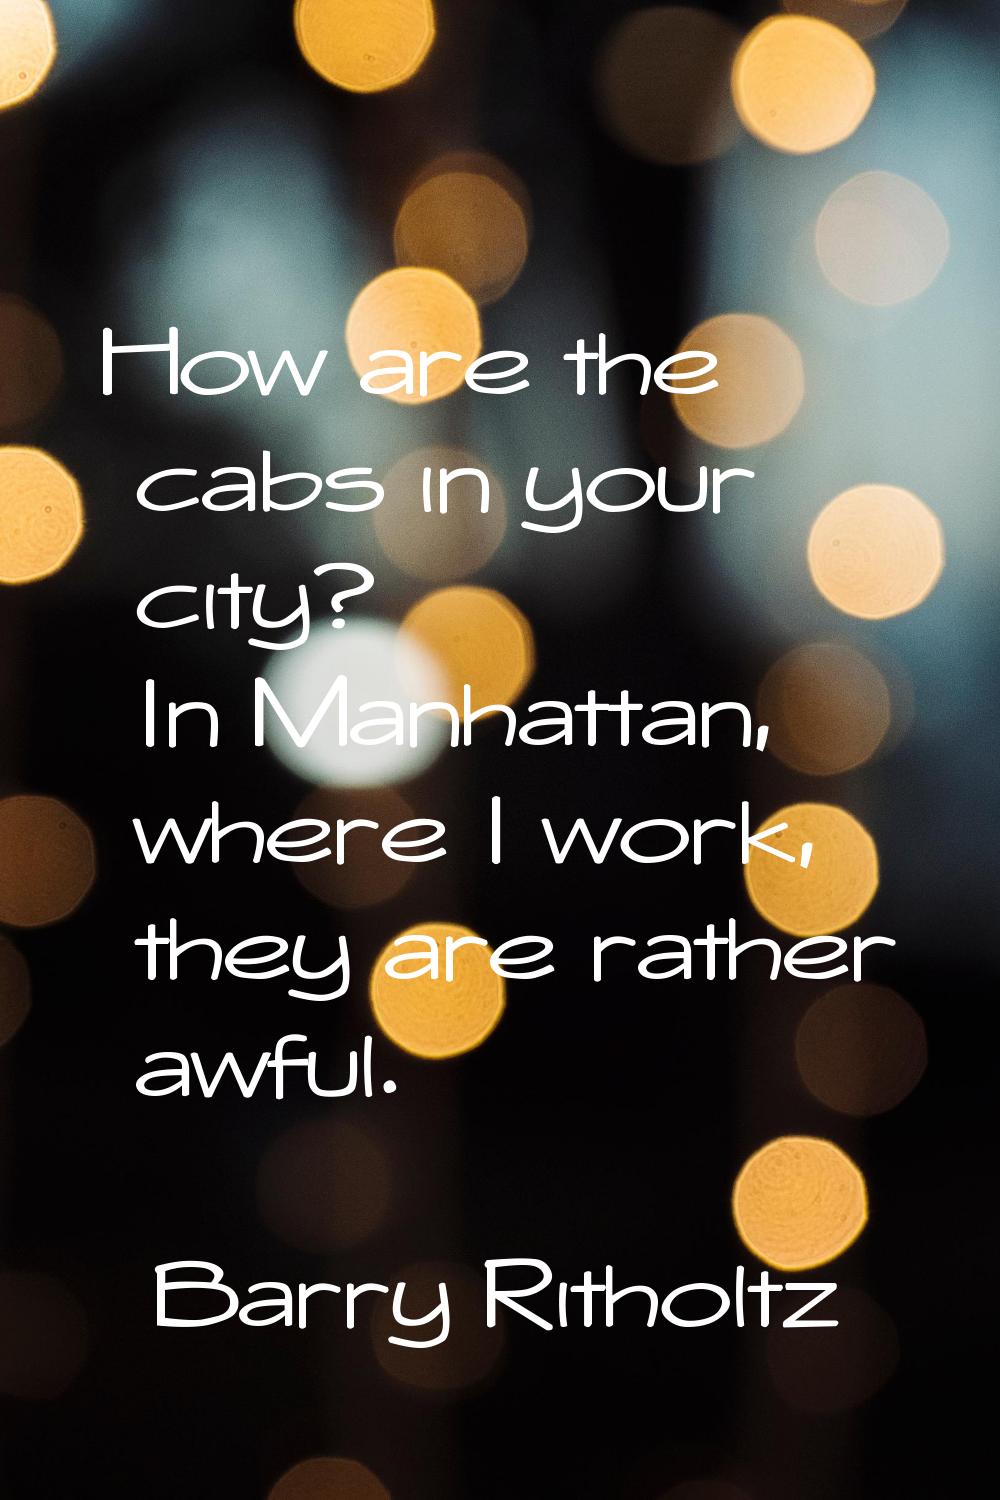 How are the cabs in your city? In Manhattan, where I work, they are rather awful.